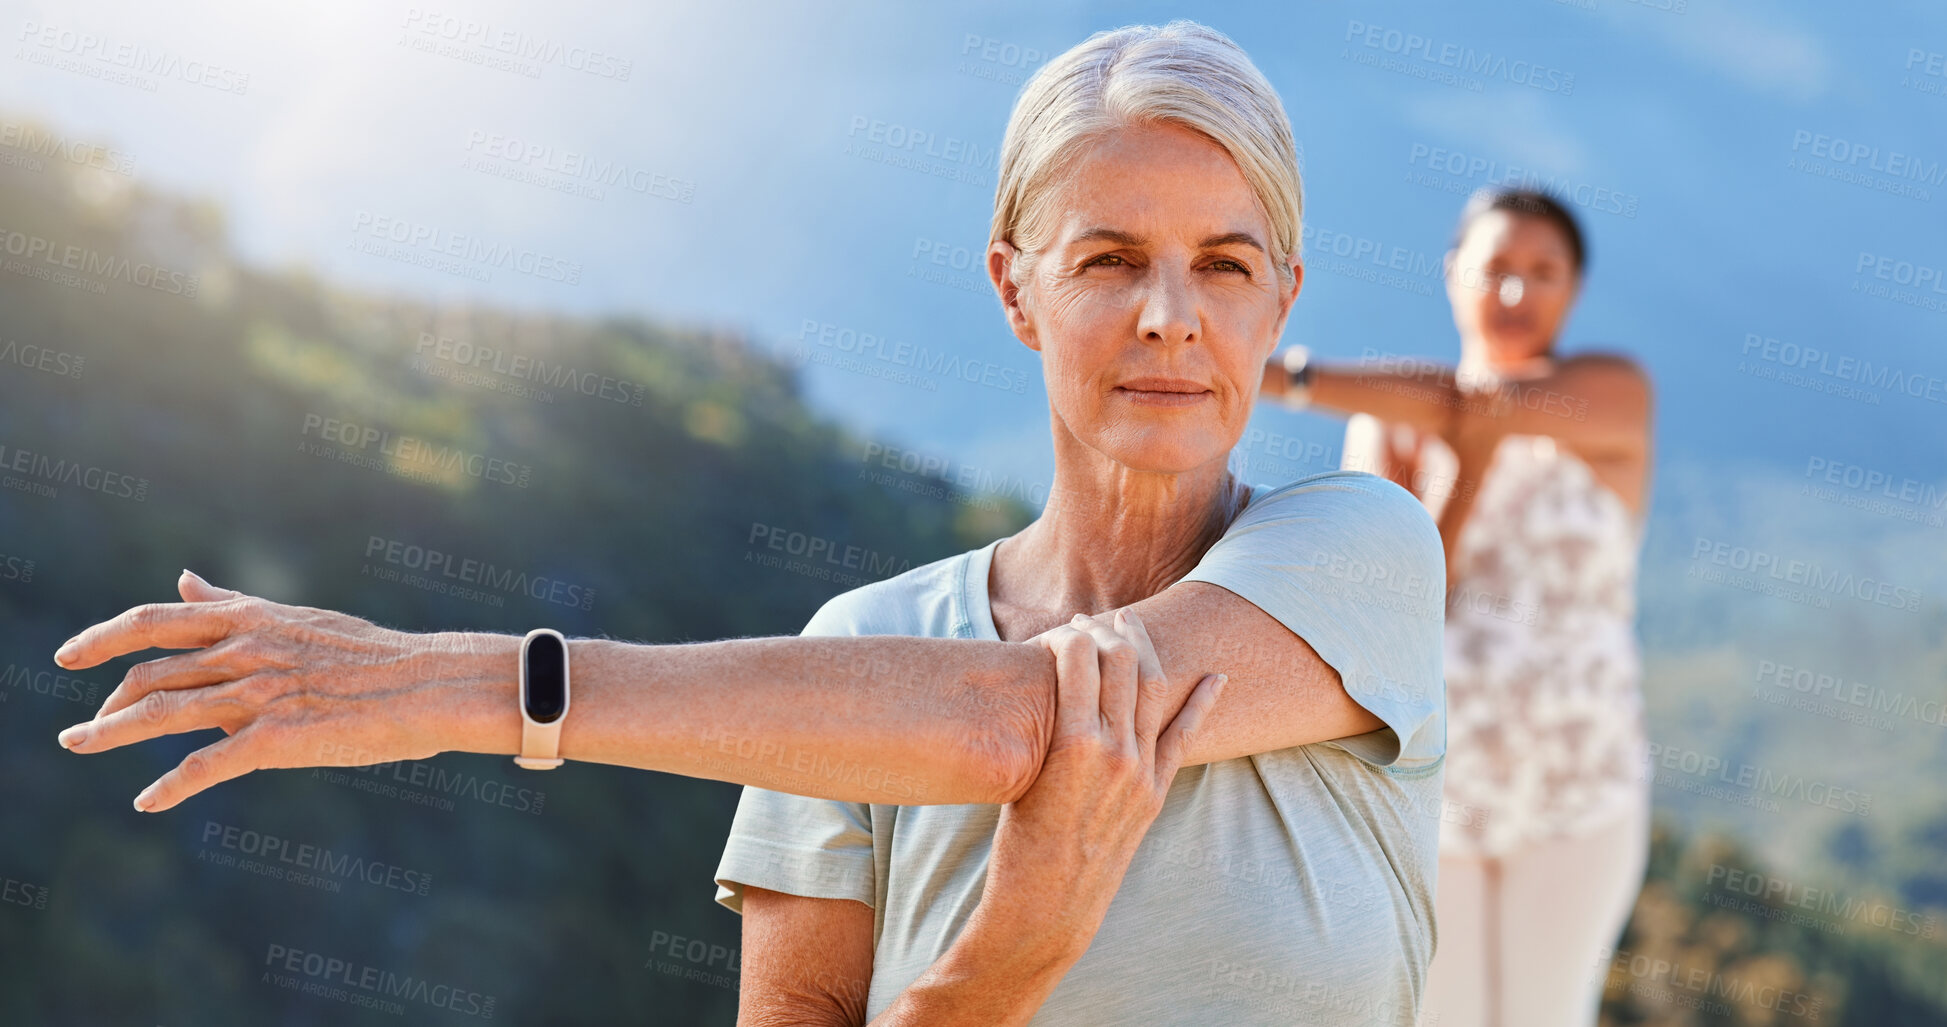 Buy stock photo Senior woman stretching her arms while exercising outdoors on a sunny day. Mature people practicing yoga together in nature staying healthy and active during retirement. Wearing smart watch